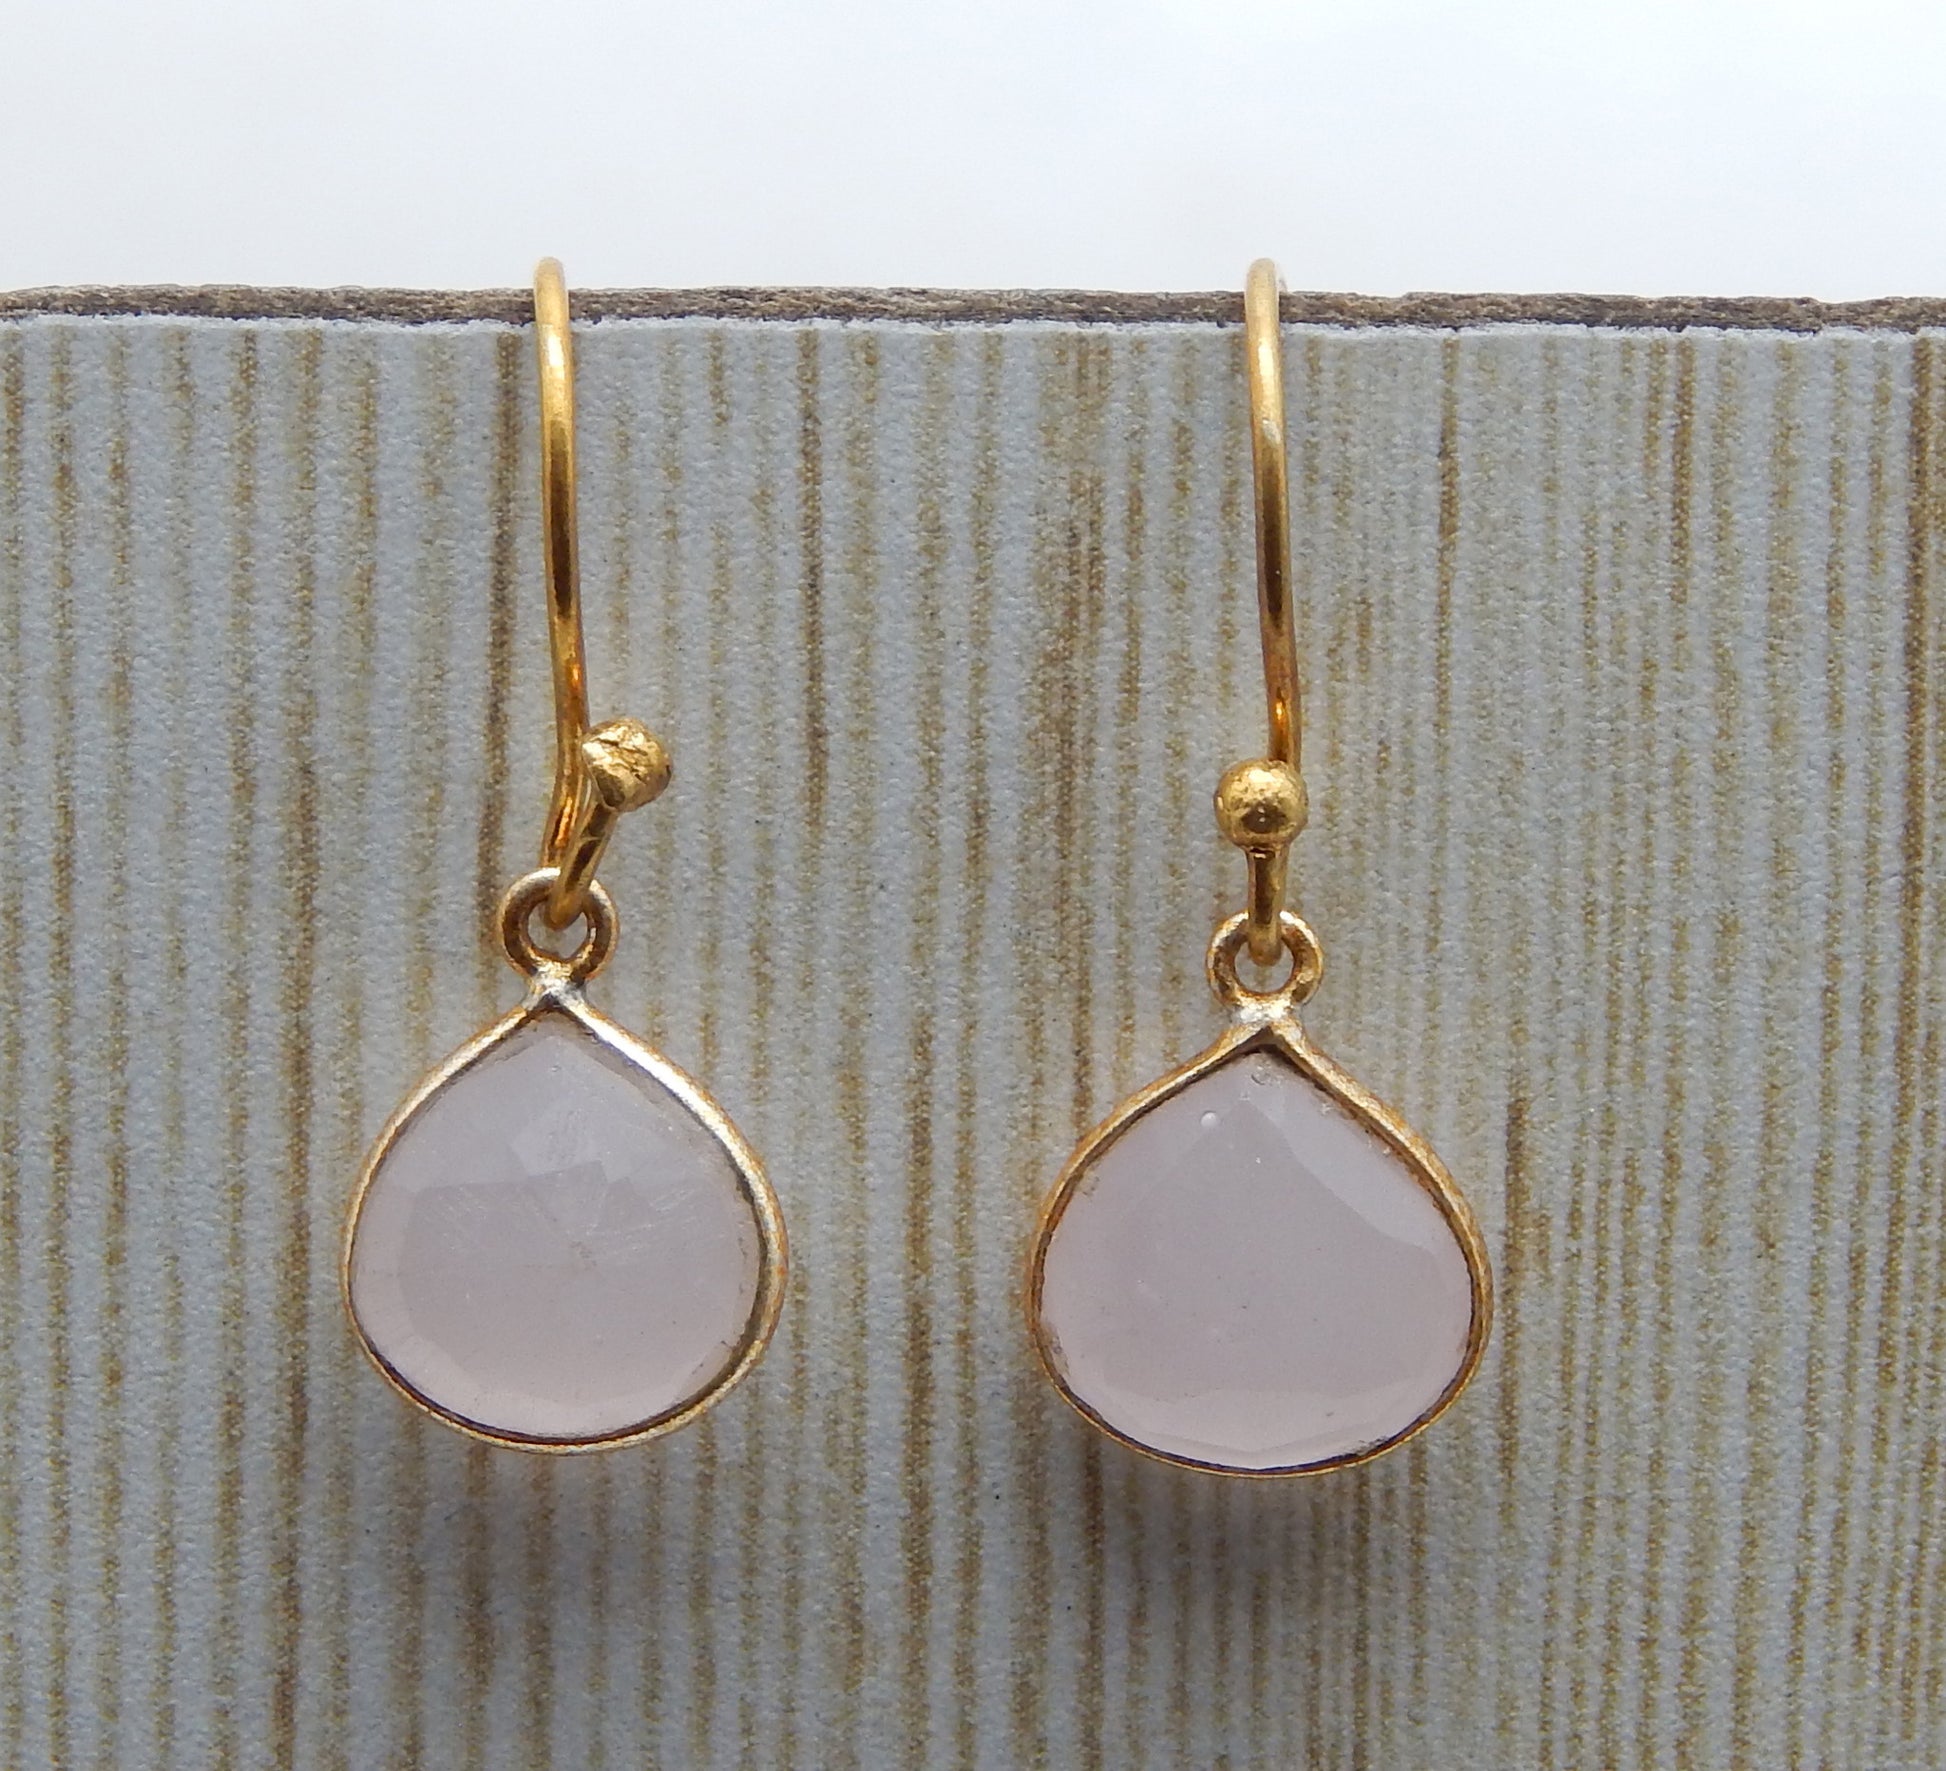 White Chalcedony Earrings - An Indian Summer